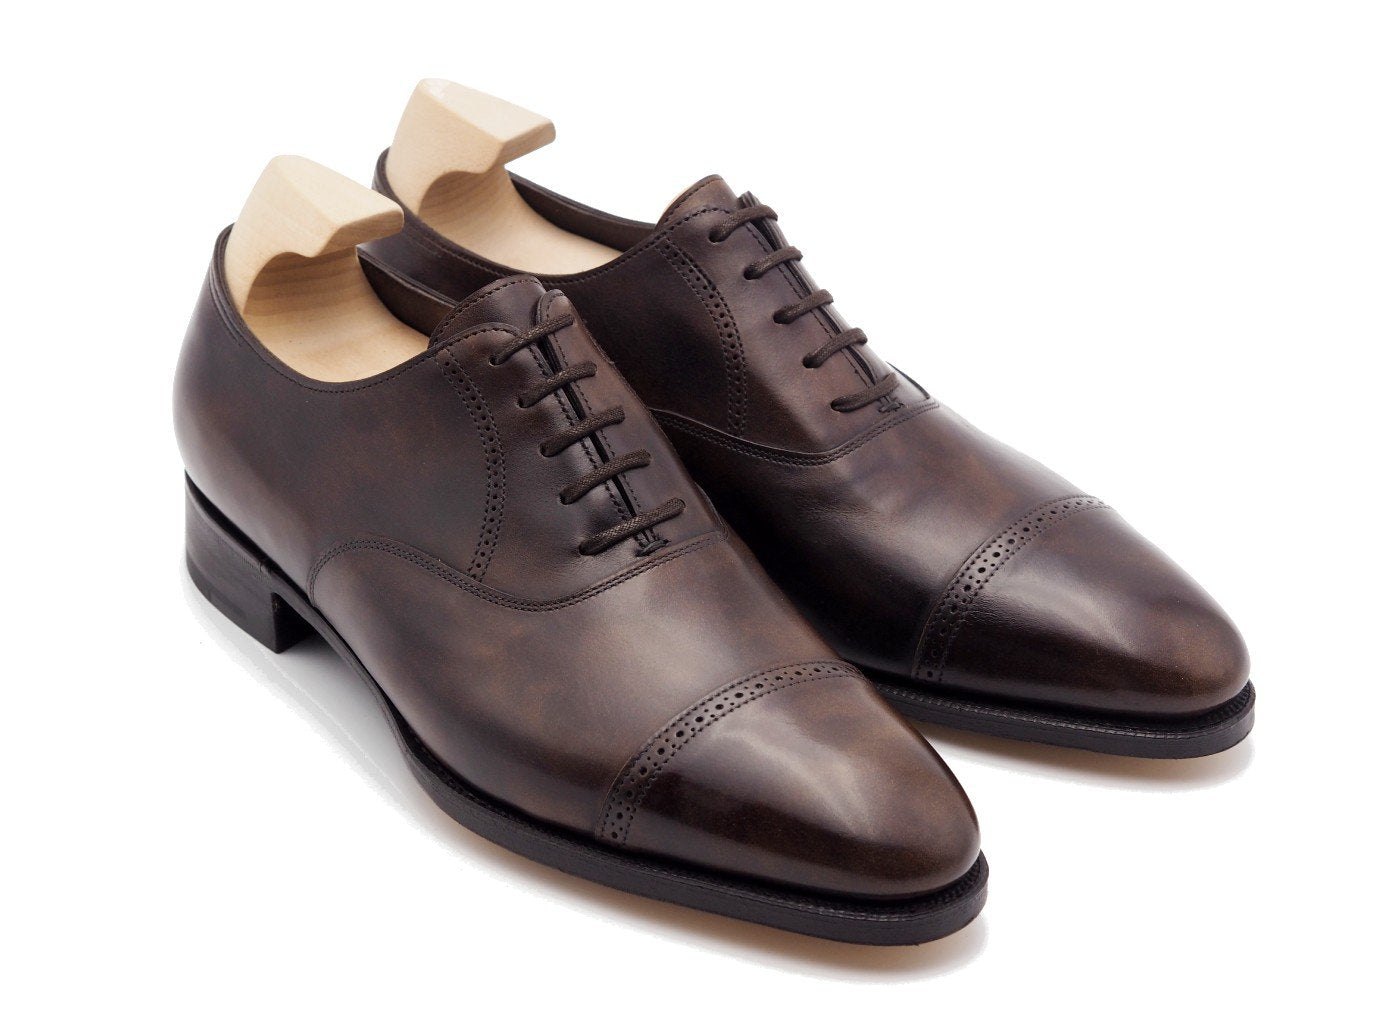 Front angle view of John Lobb Philip II quarter brogue oxford shoes in dark brown museum calf with shoe trees